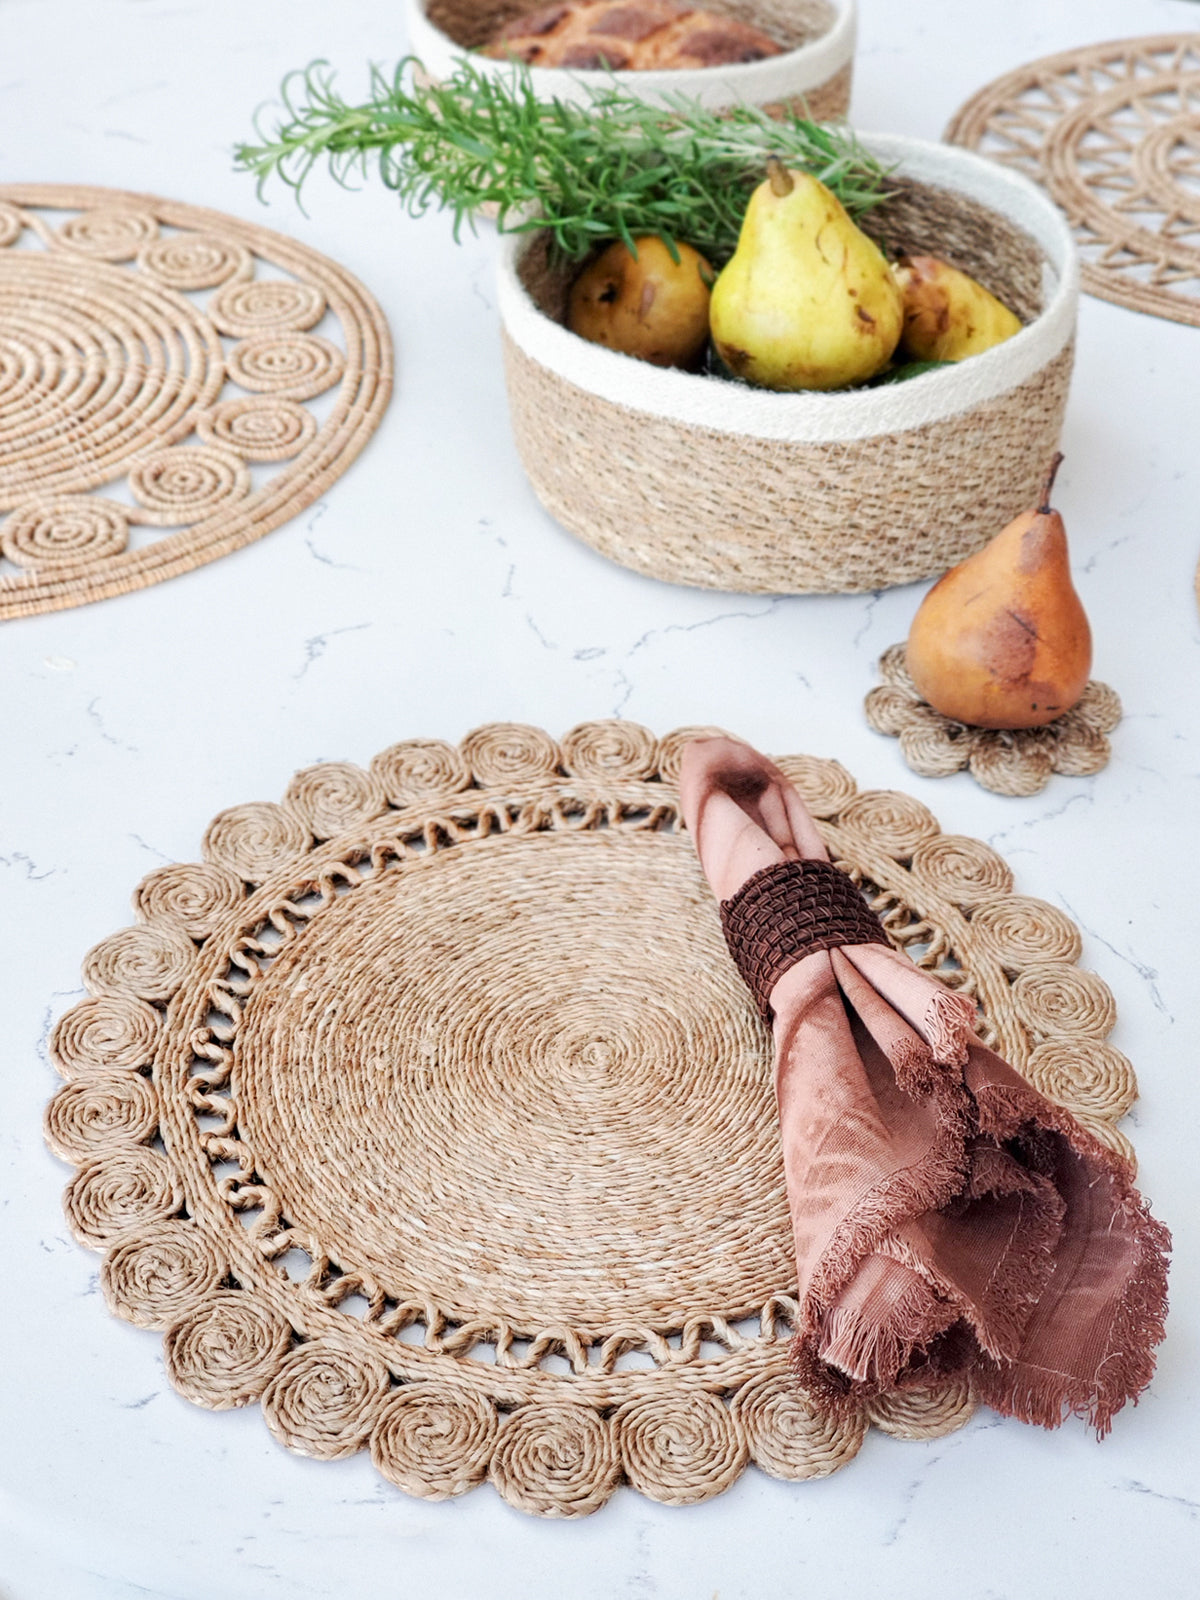 flower placemats made of jute styled with fruit bowl and napkin